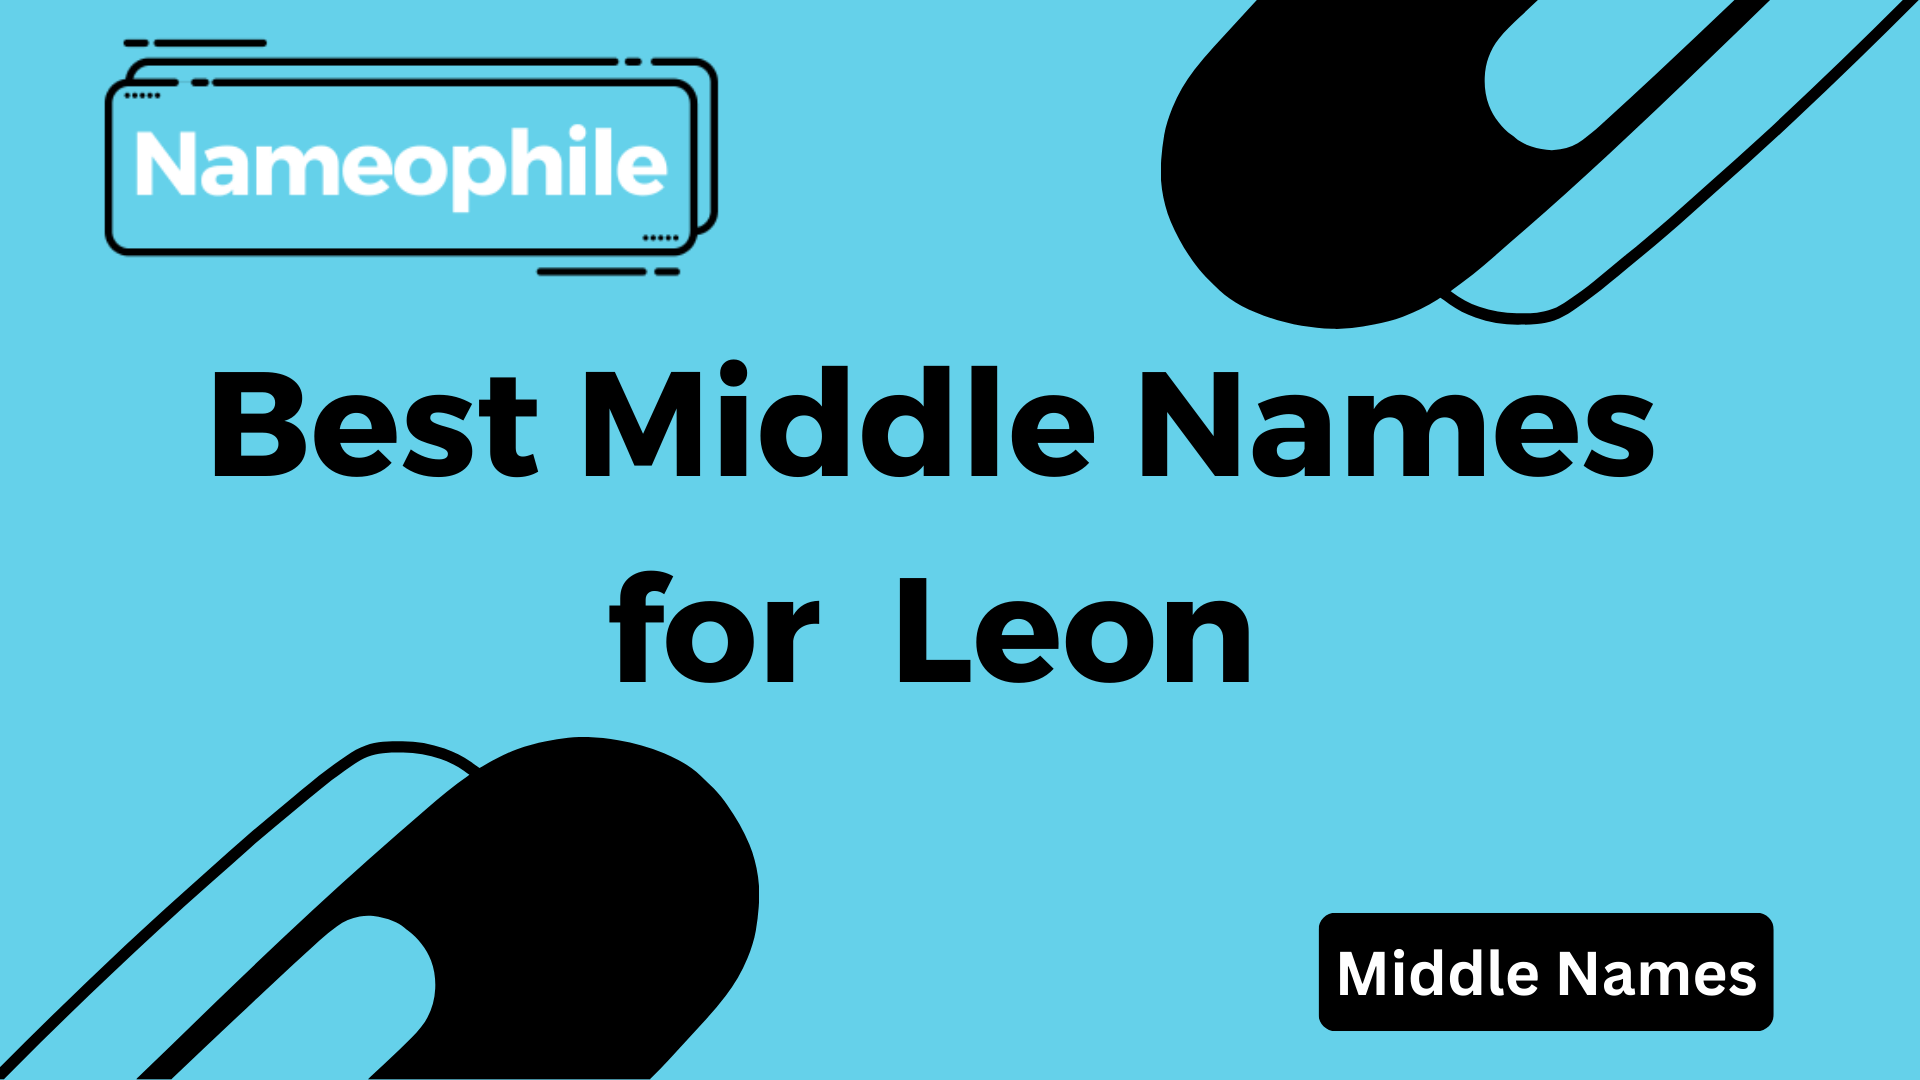 Best Middle Names for Leon